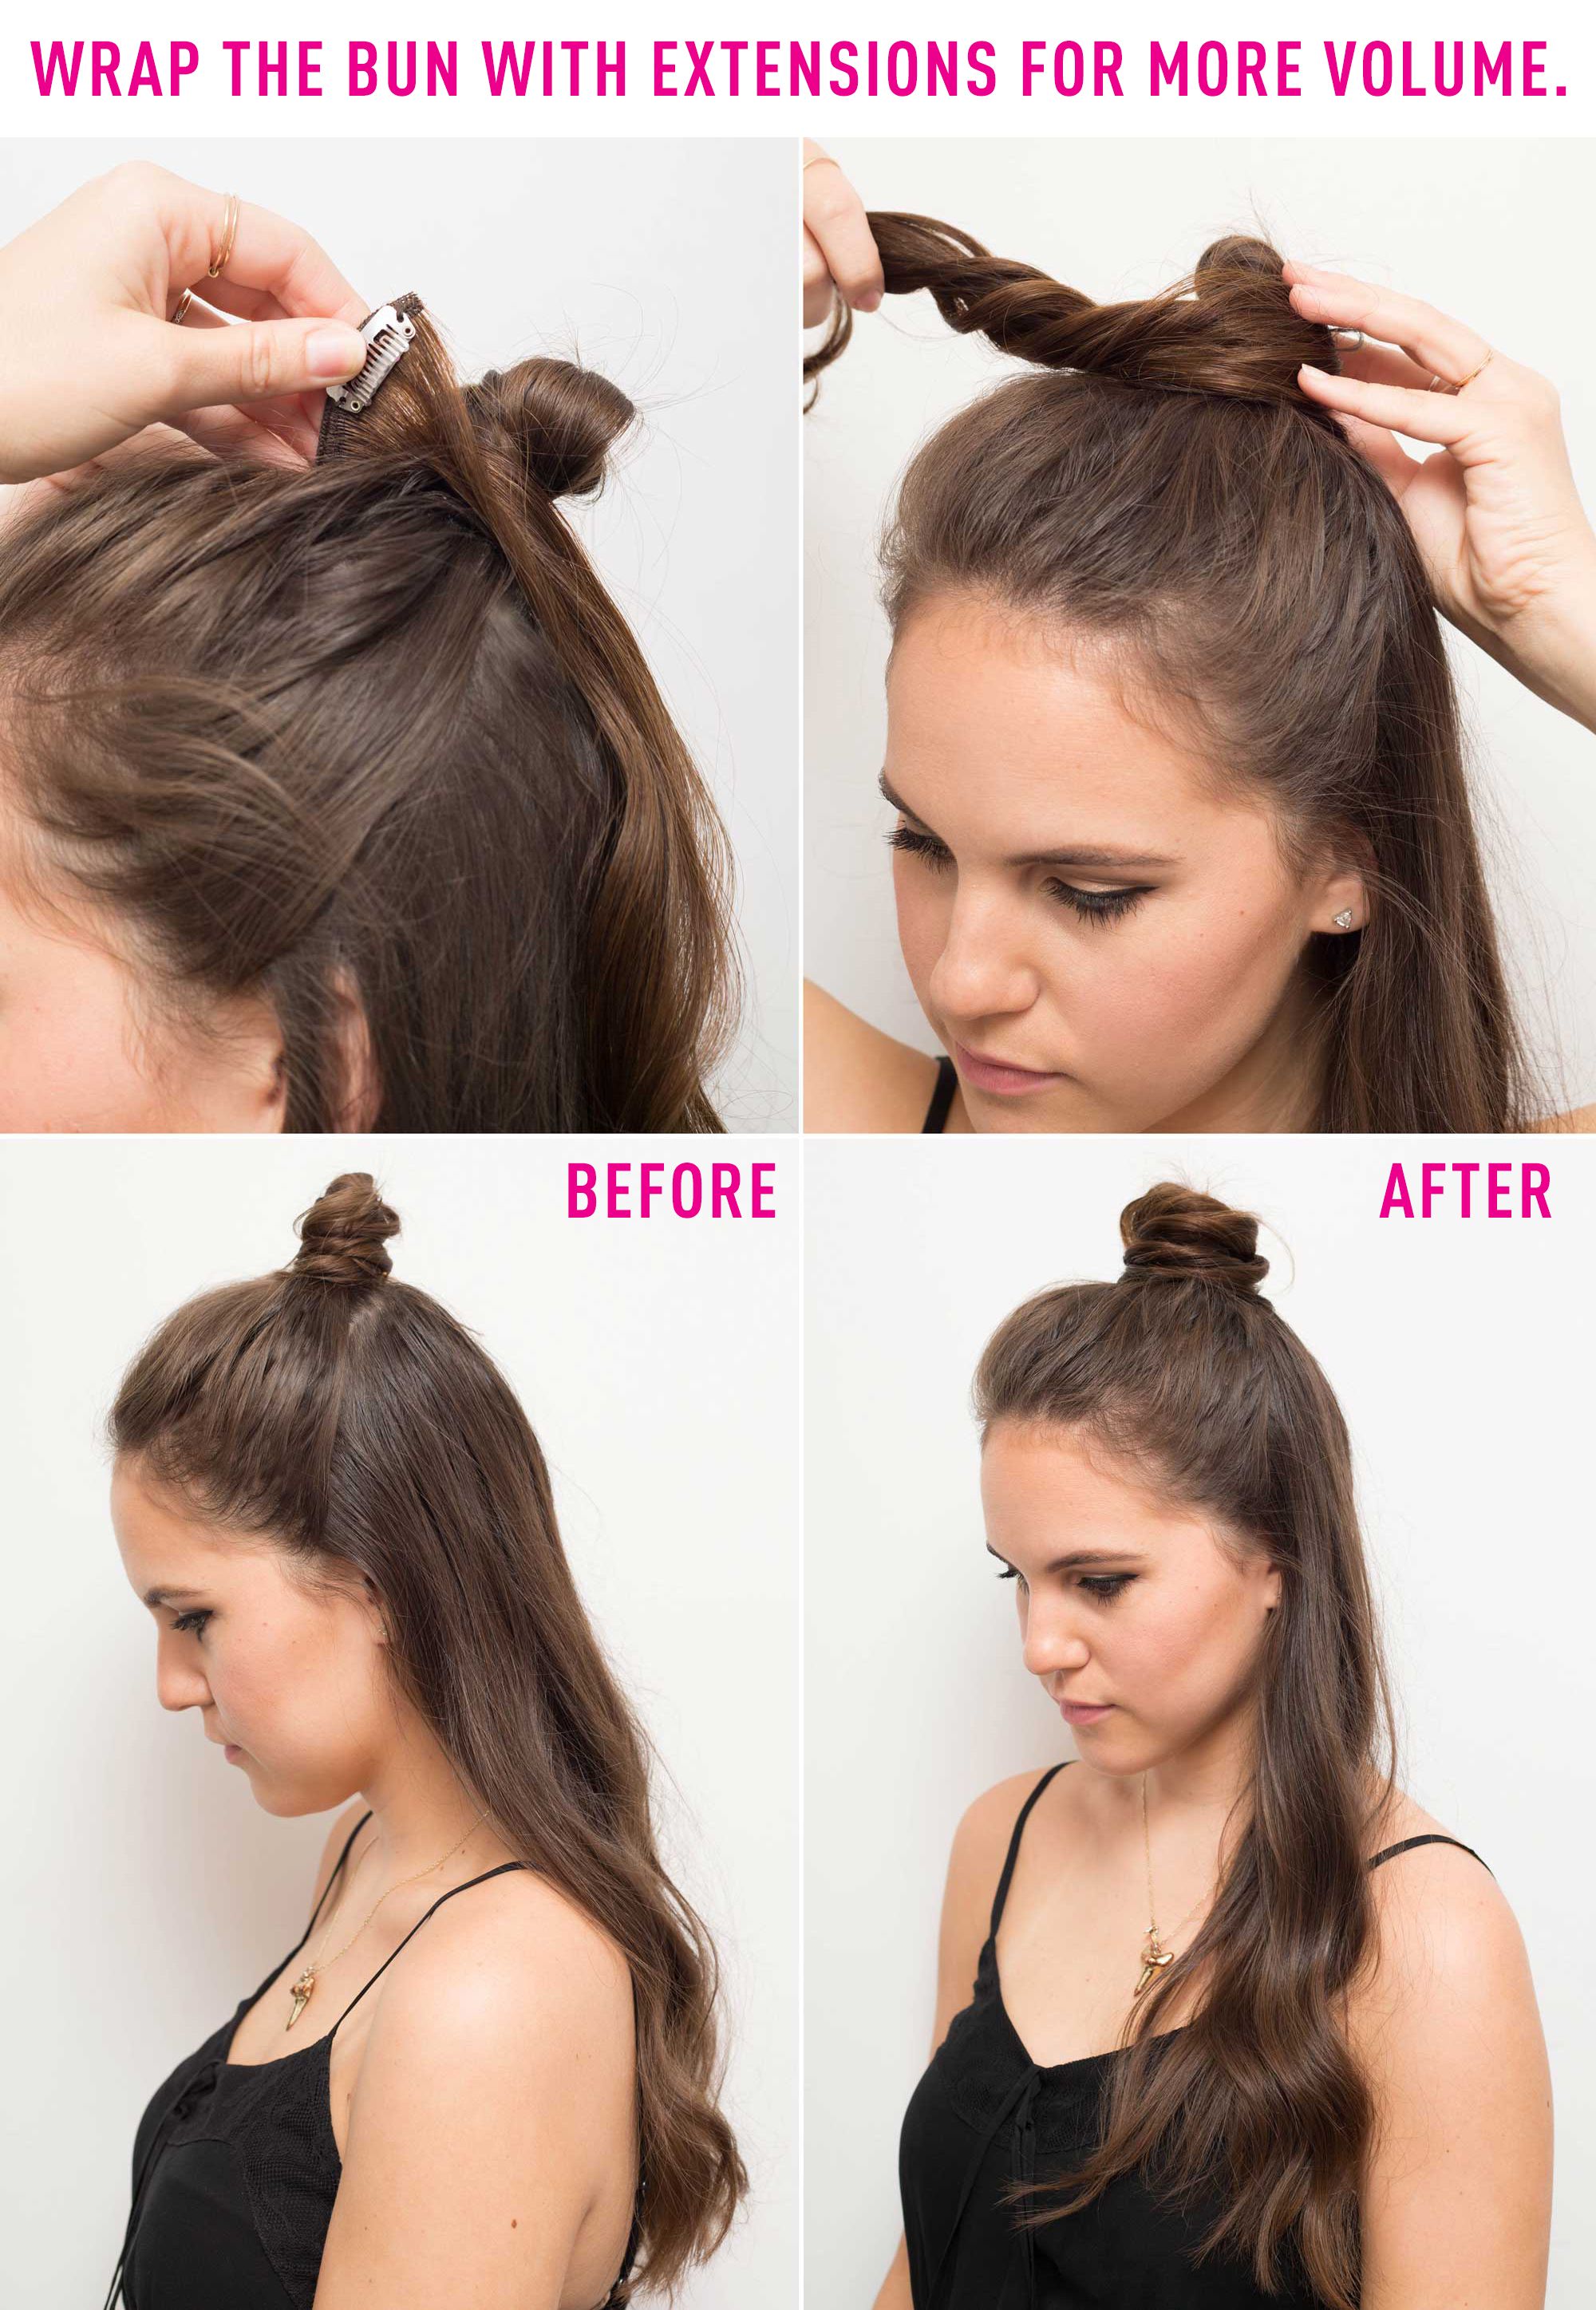 D.I.Y. Bridal Hairstyles for a Chic Wedding-Day Look - The New York Times